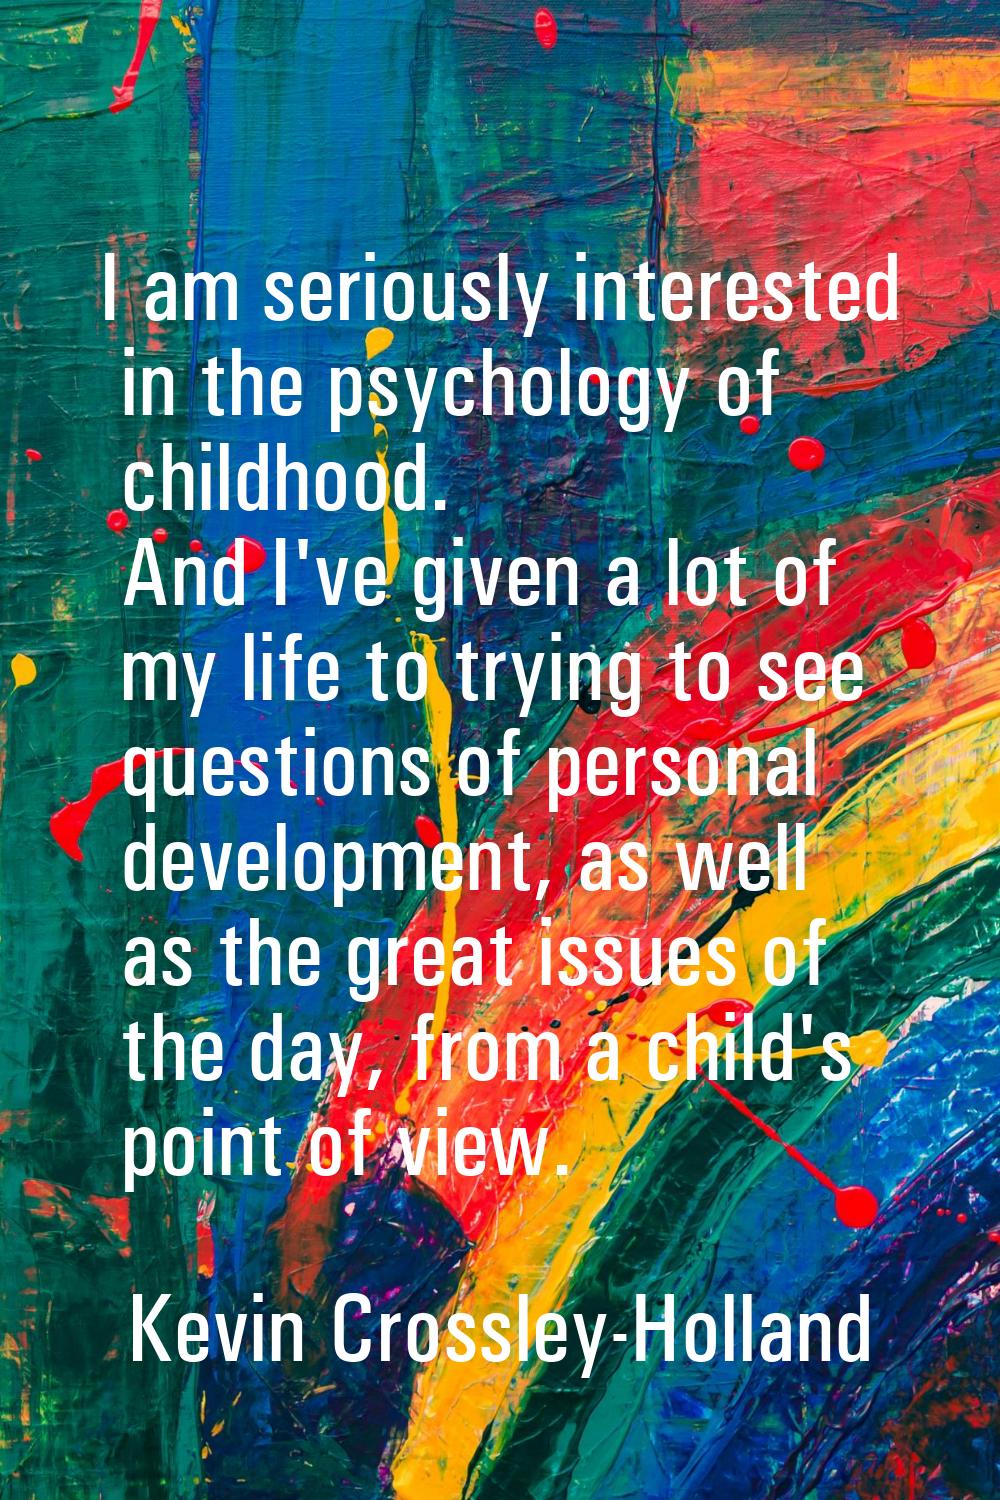 I am seriously interested in the psychology of childhood. And I've given a lot of my life to trying